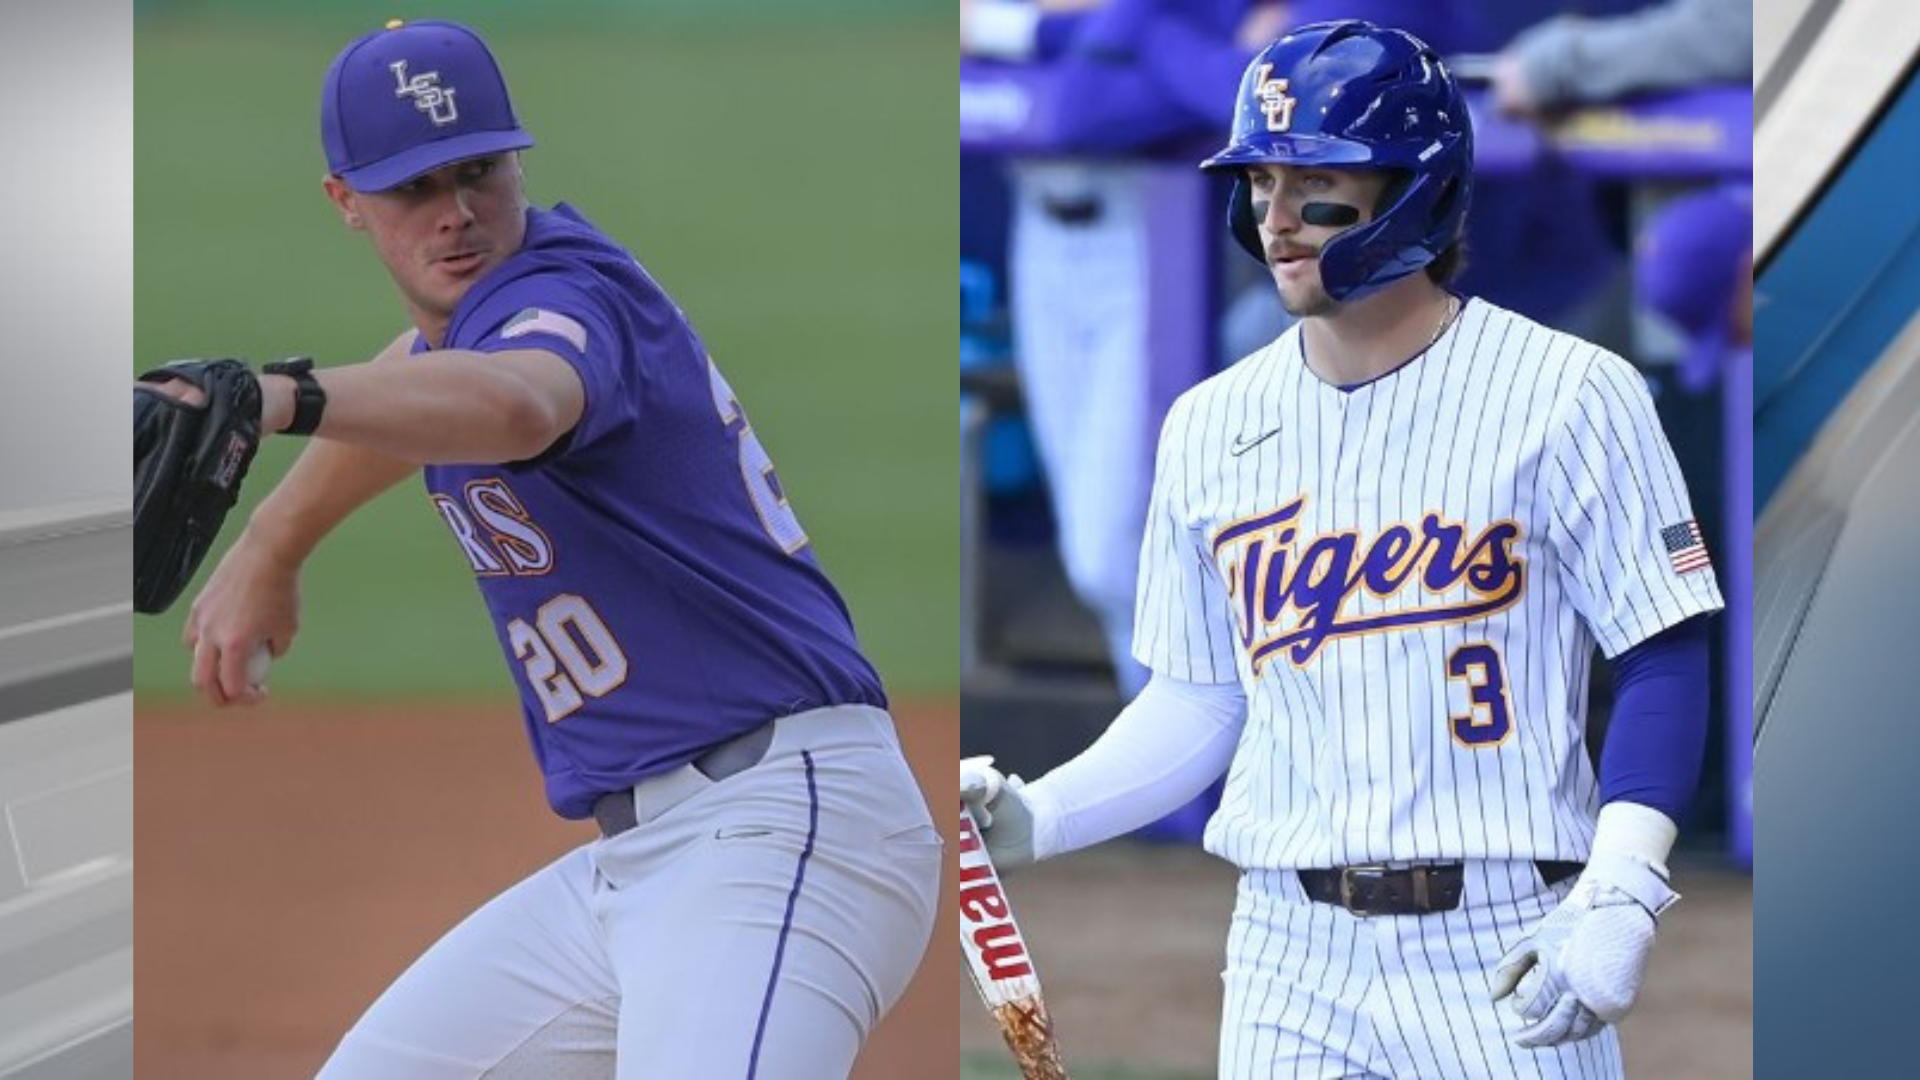 Official lsu tiger baseball ncaa college world series roster 2023